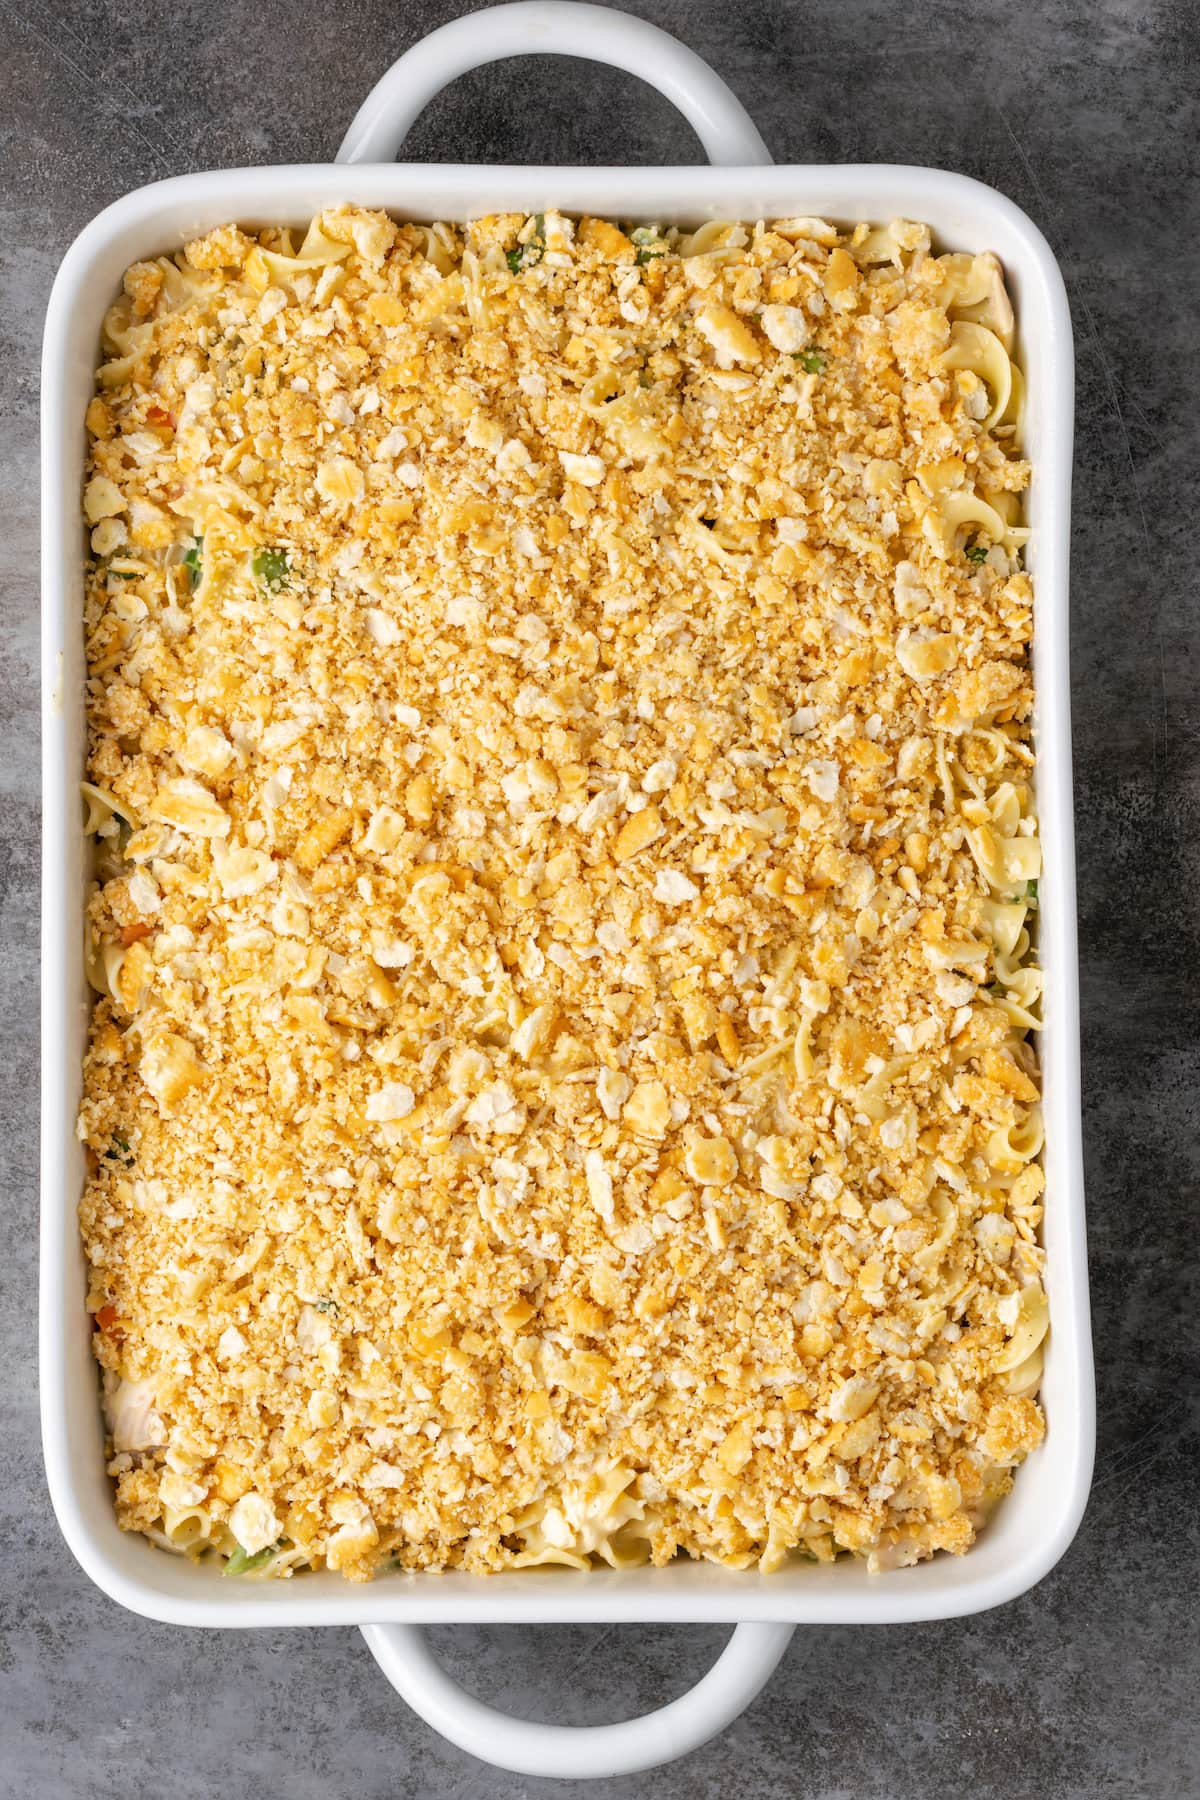 Overhead view of unbaked chicken noodle casserole in a baking dish topped with Ritz crackers.